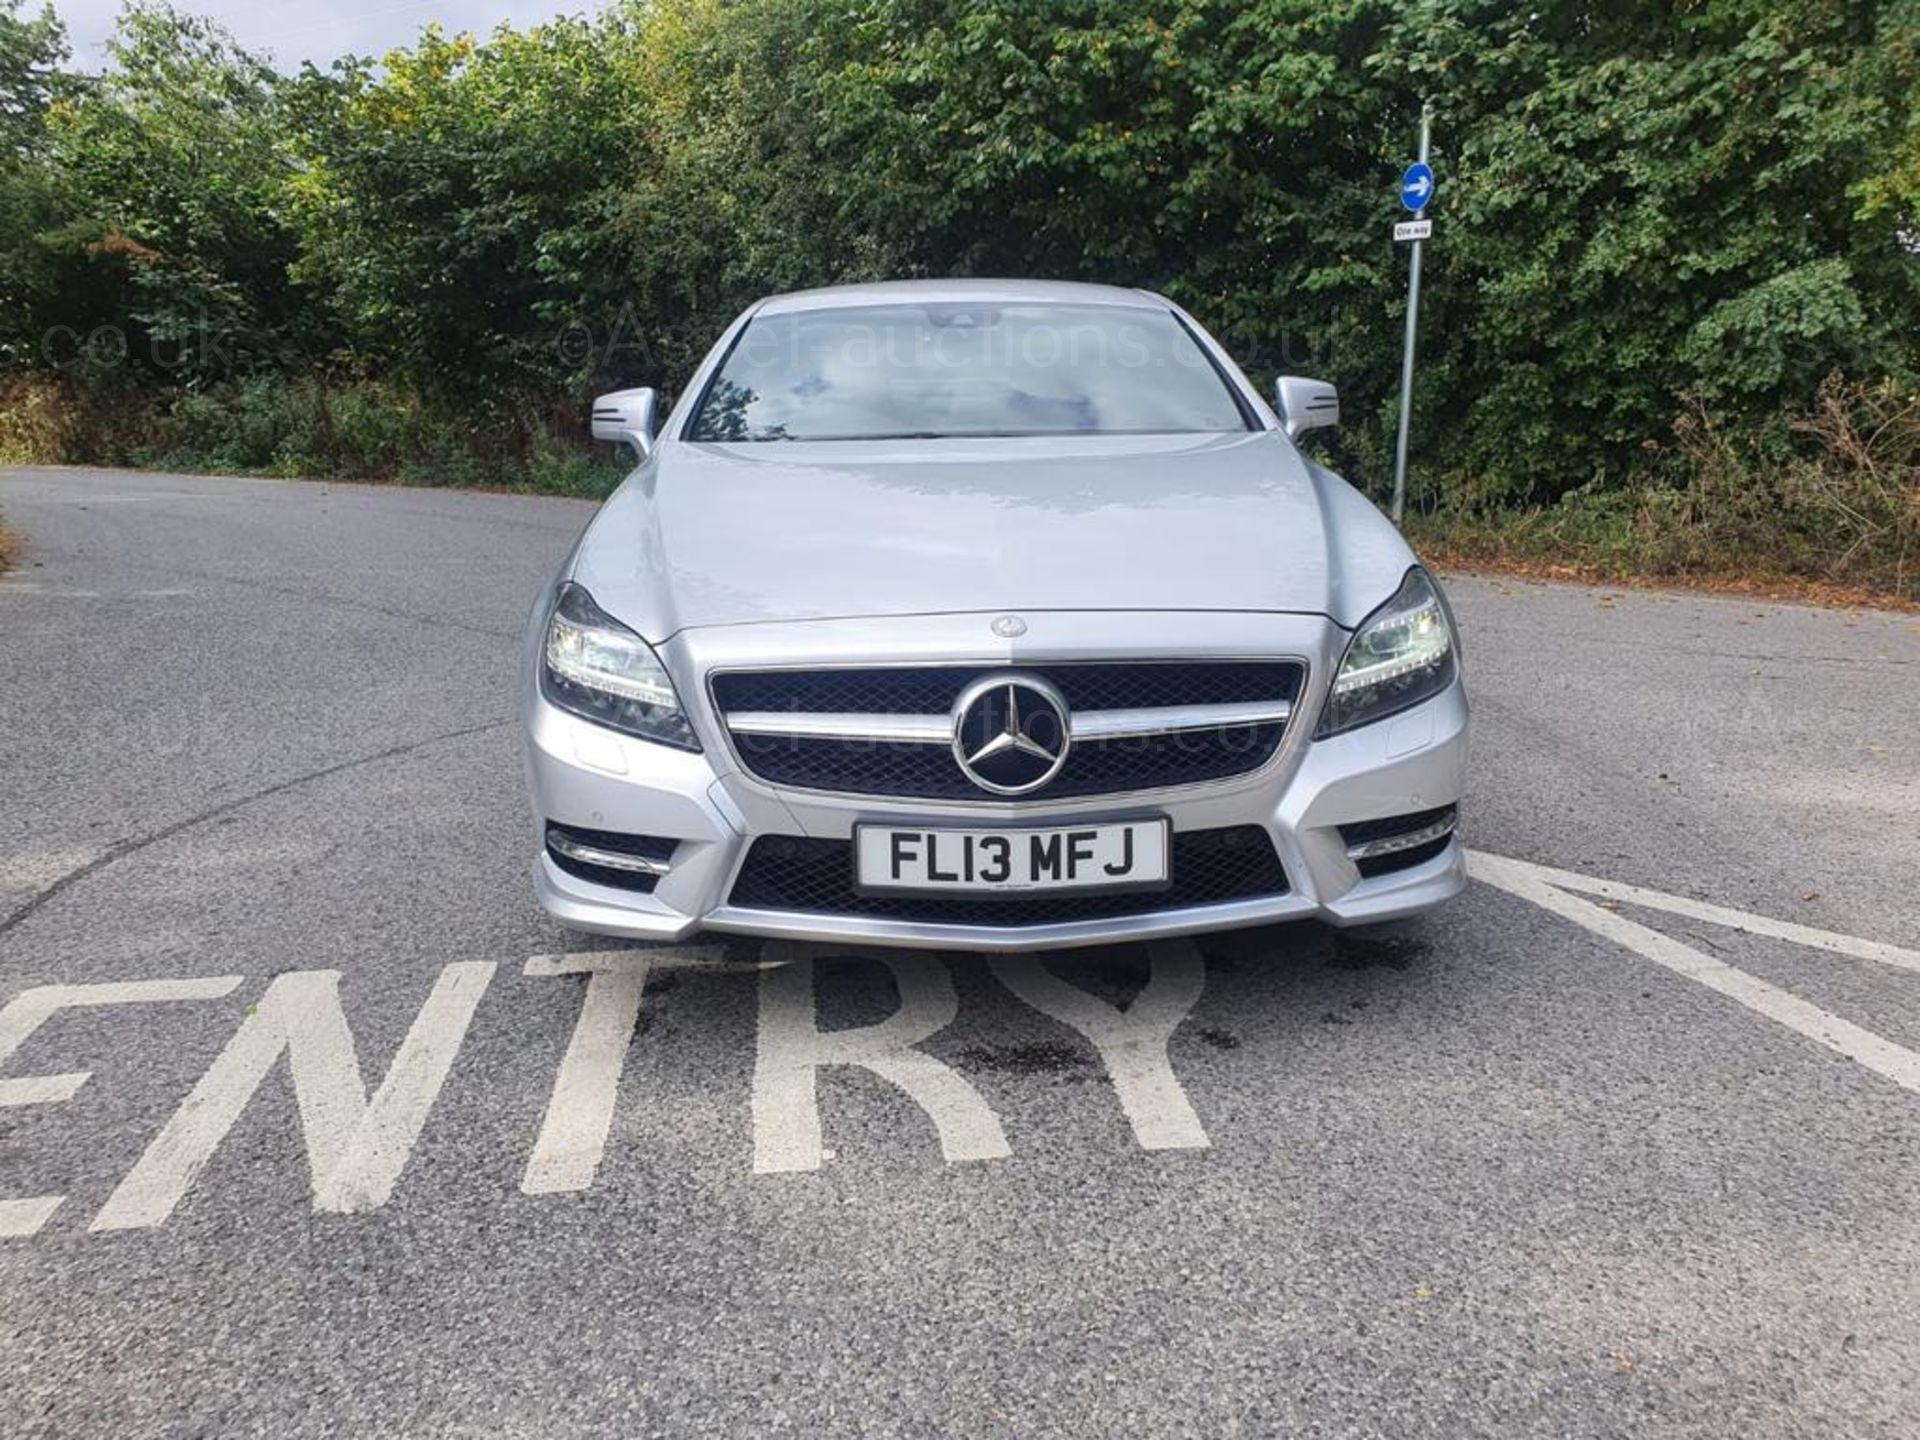 2013 MERCEDES-BENZ CLS250 CDI AMG BLUE-CY SPORT SILVER COUPE, 2.2 DIESEL, 45,952 MILES *NO VAT* - Image 2 of 34